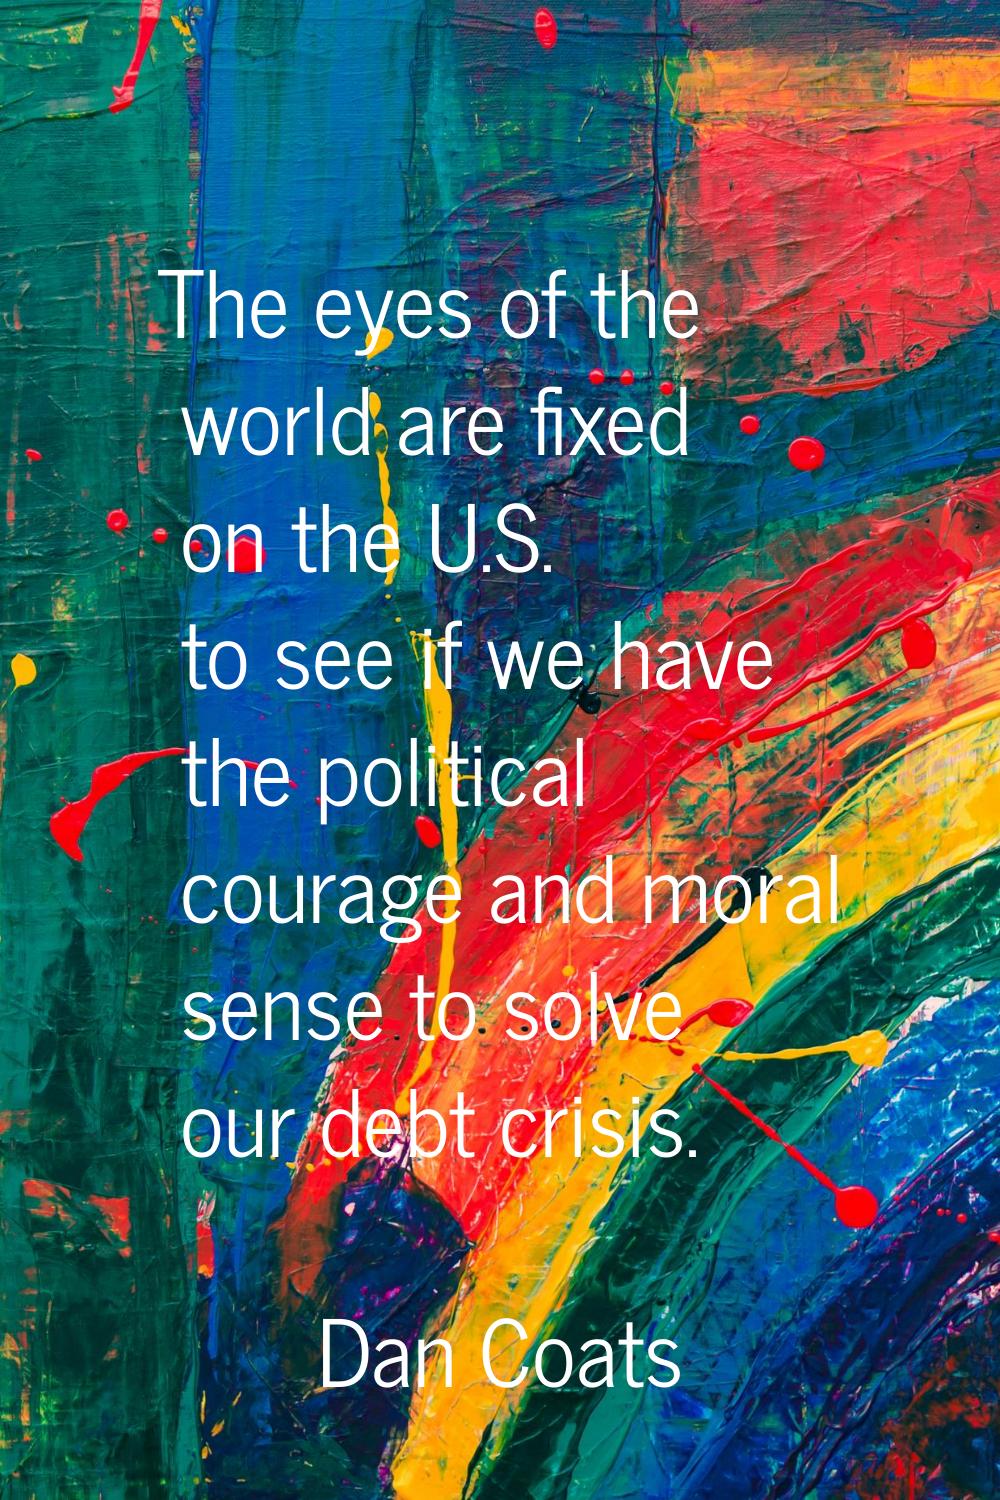 The eyes of the world are fixed on the U.S. to see if we have the political courage and moral sense